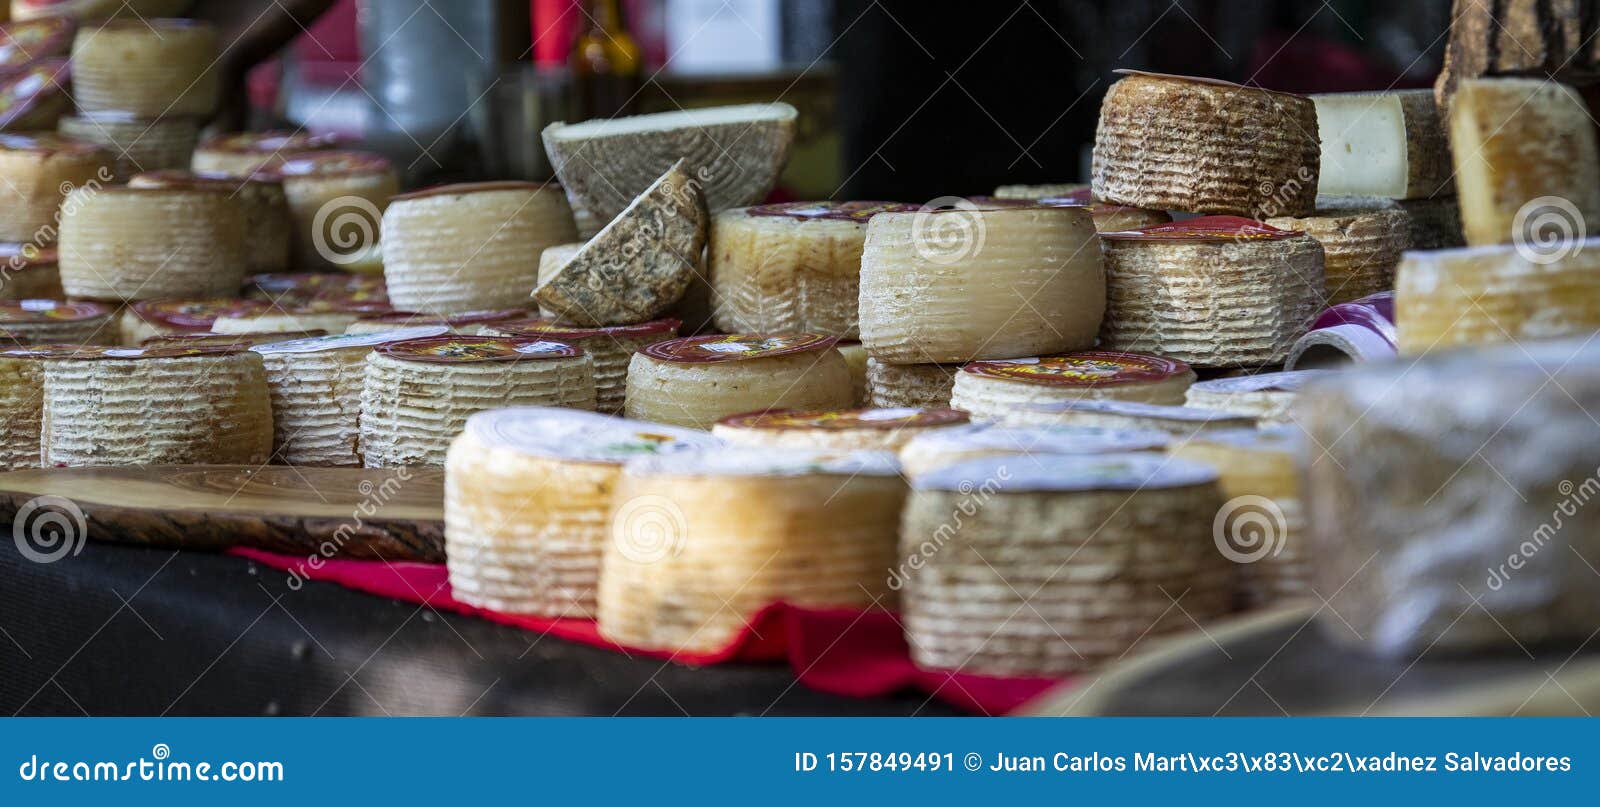 traditional goat cheese typical of liebana, cantabria. spain